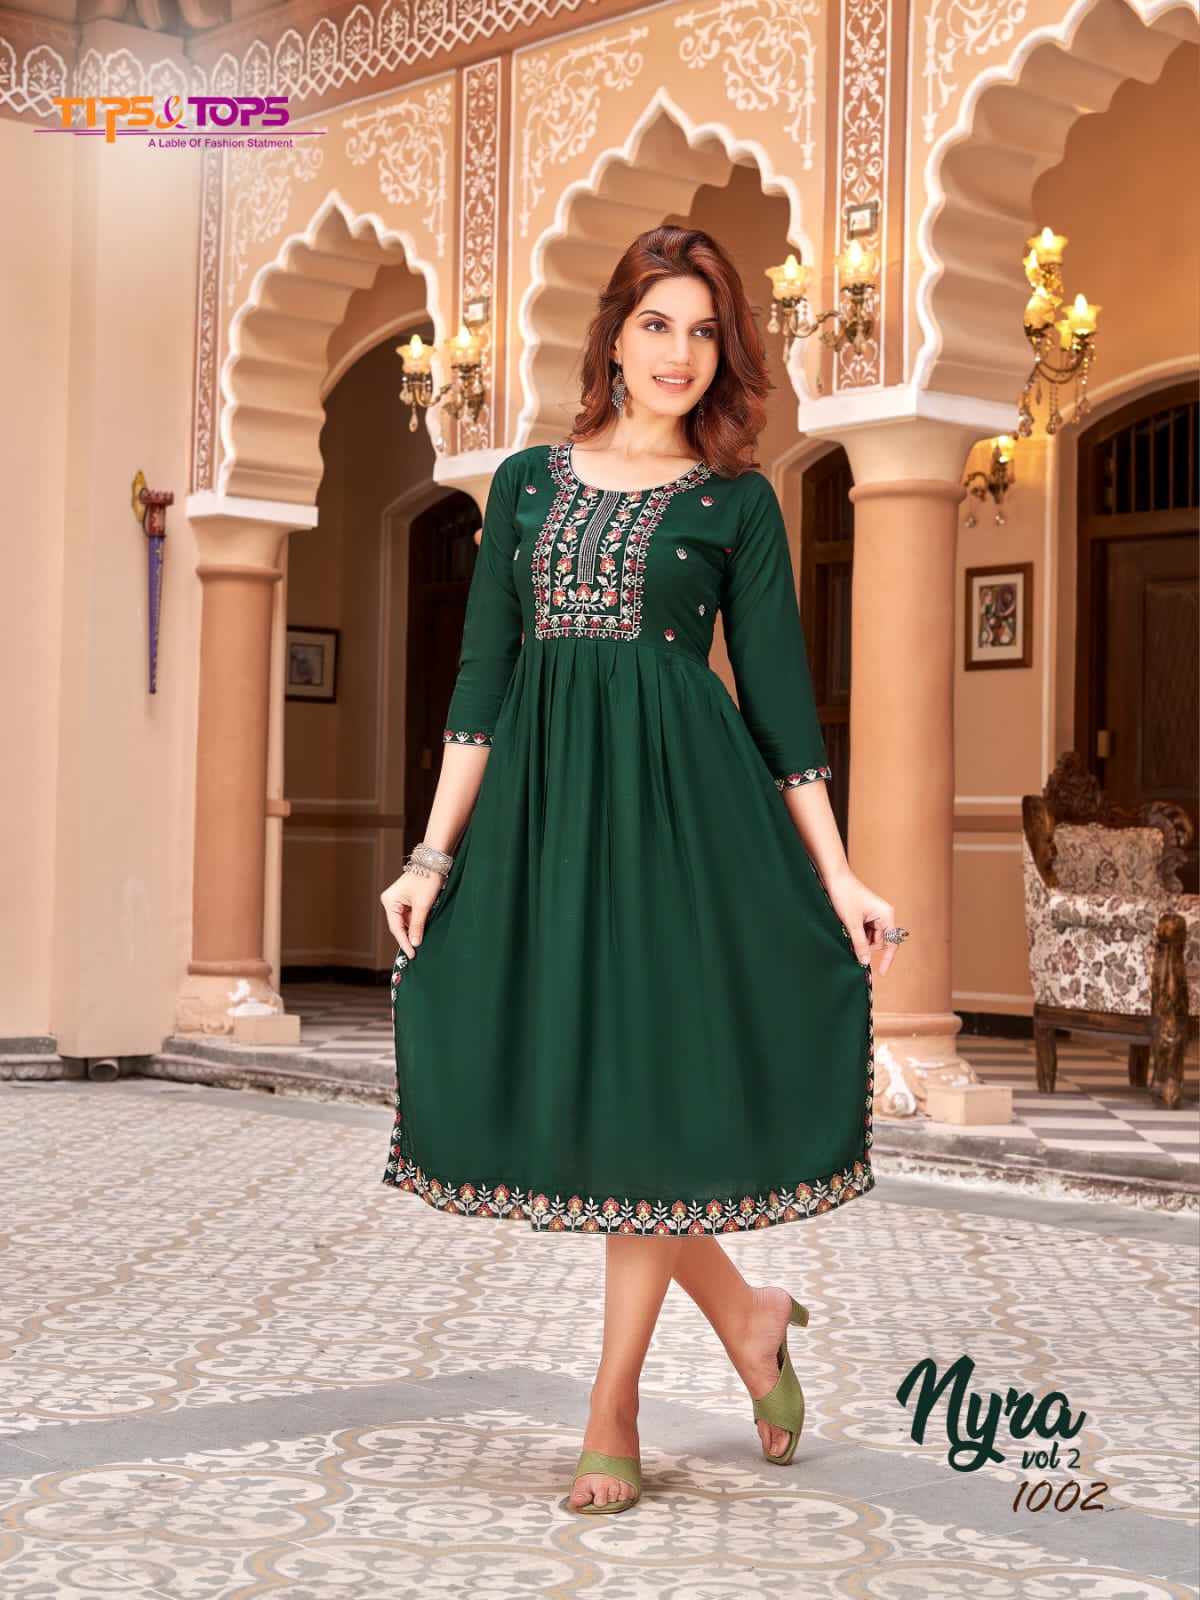 Where to Buy 14 Stylish Kurti Tops Online at Incredible Prices. Also See  the Must Have Kurti Designs of 2020 and Tips on How to Style Them